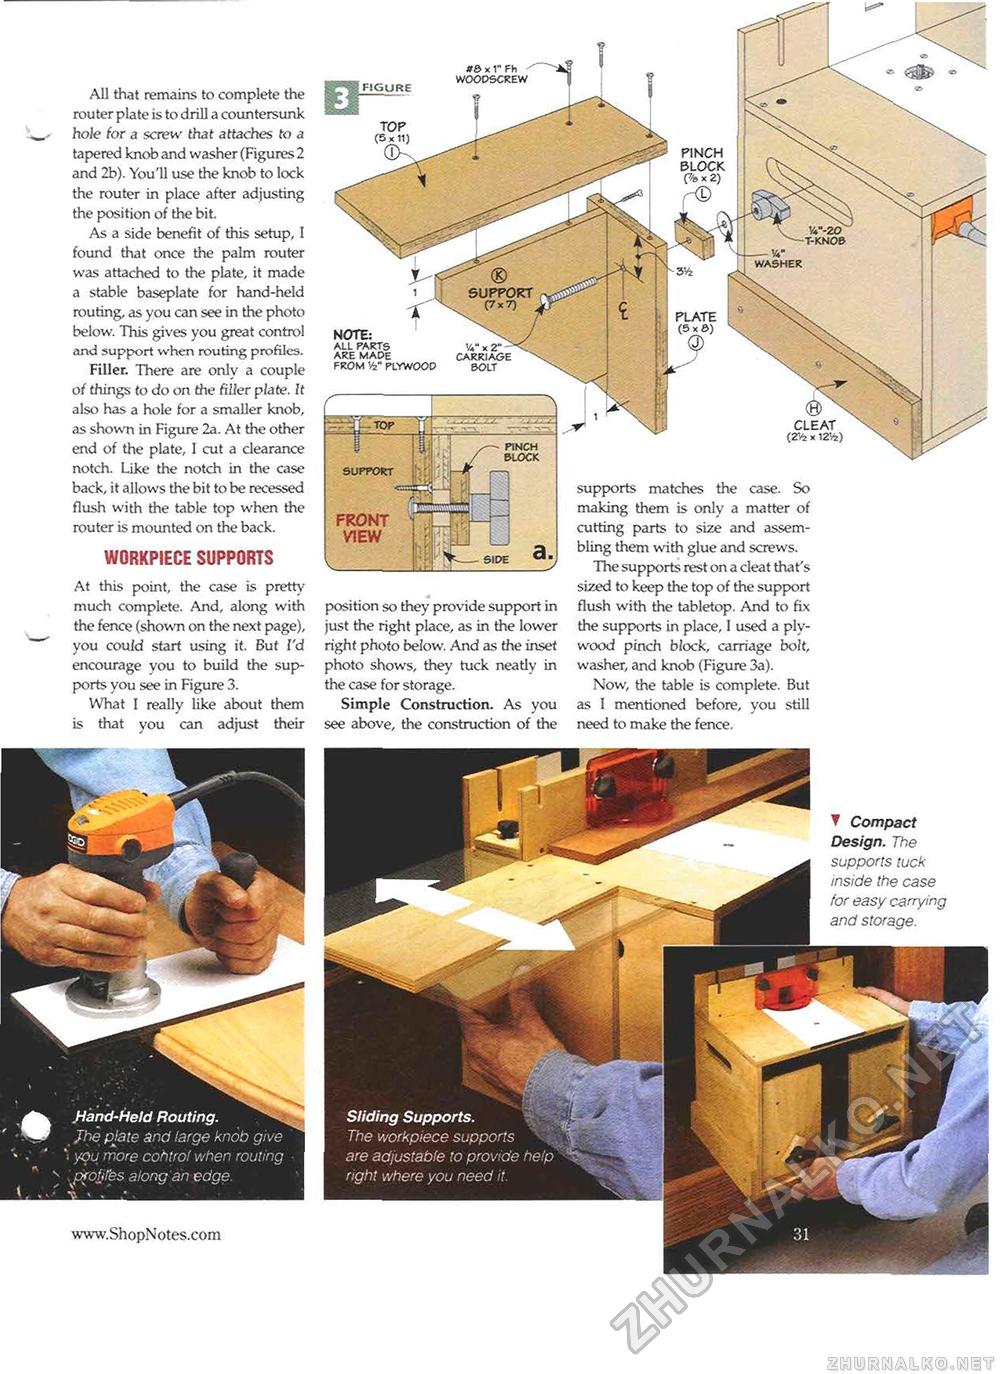 90 - Get the Most out of a Plunge Router,  31